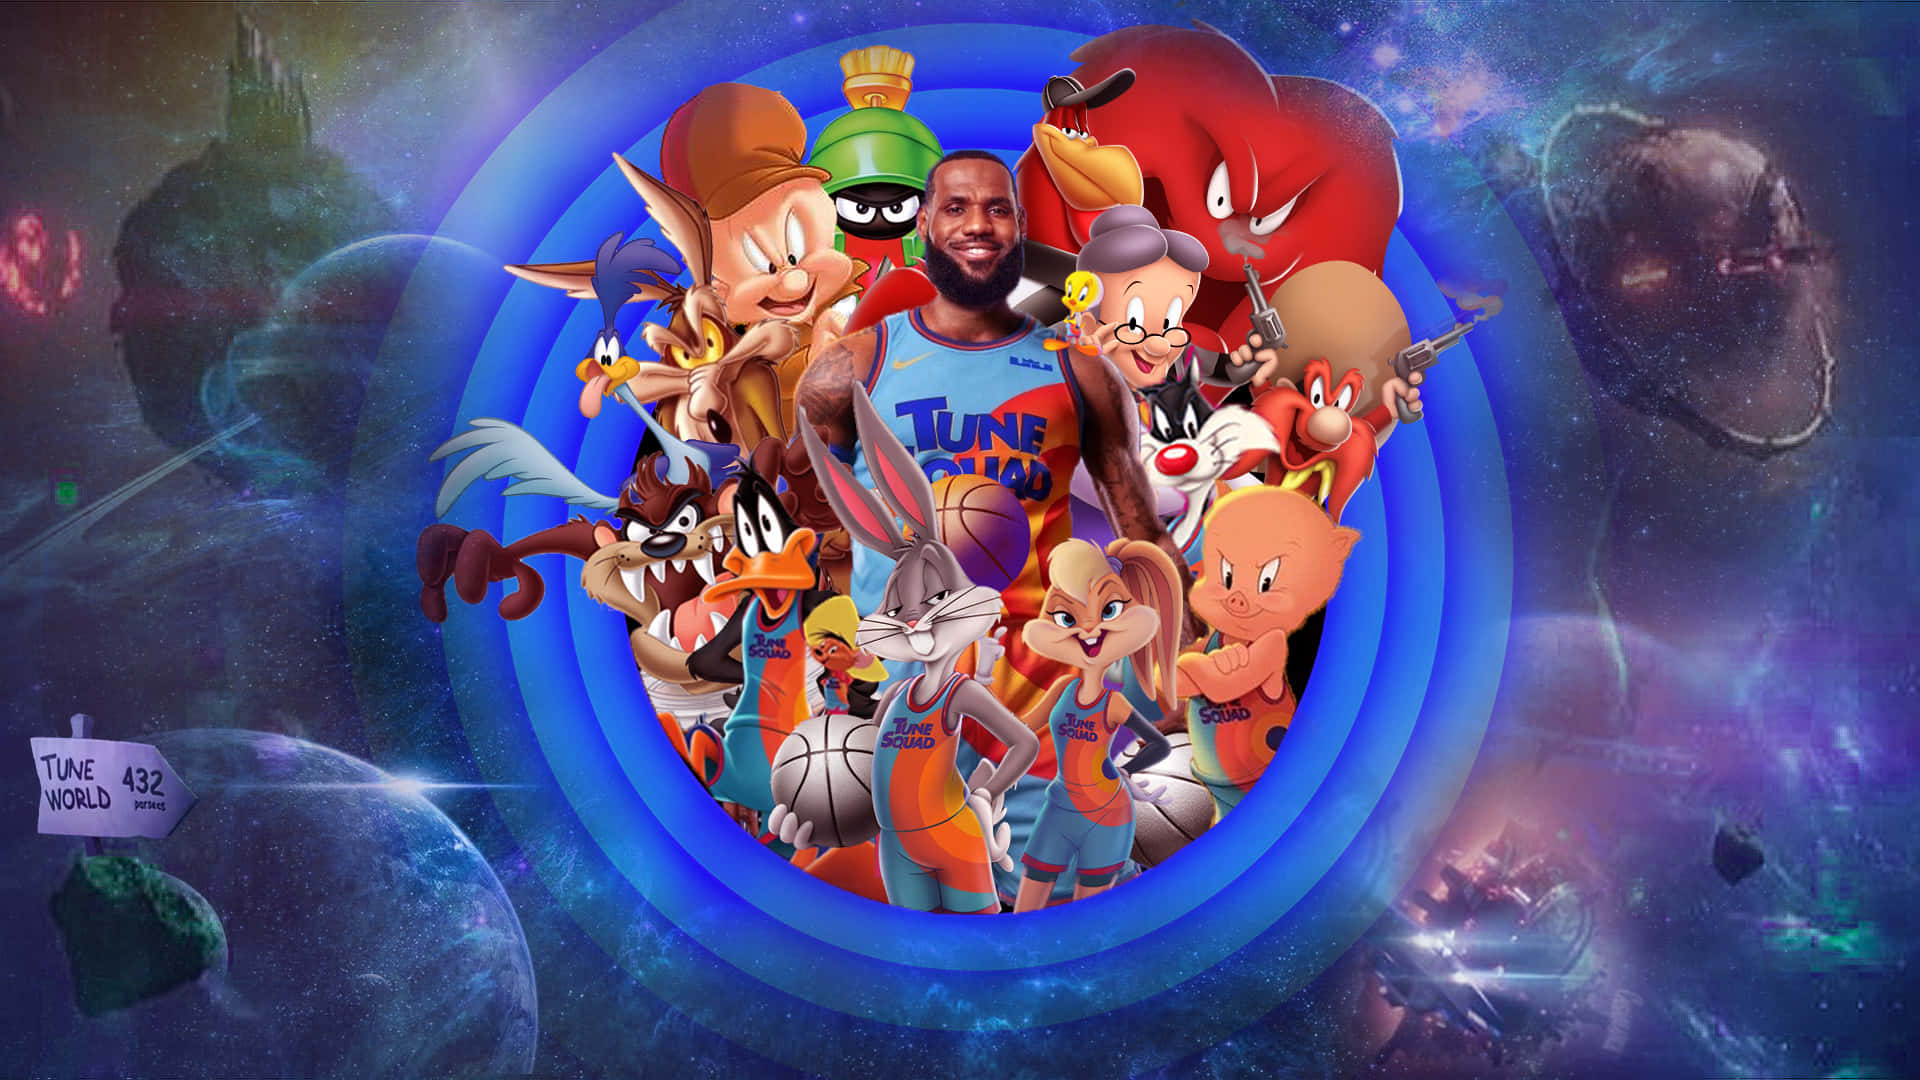 LeBron James teams up with the Tune Squad to save the world from the AI-G, in Space Jam A New Legacy!" Wallpaper